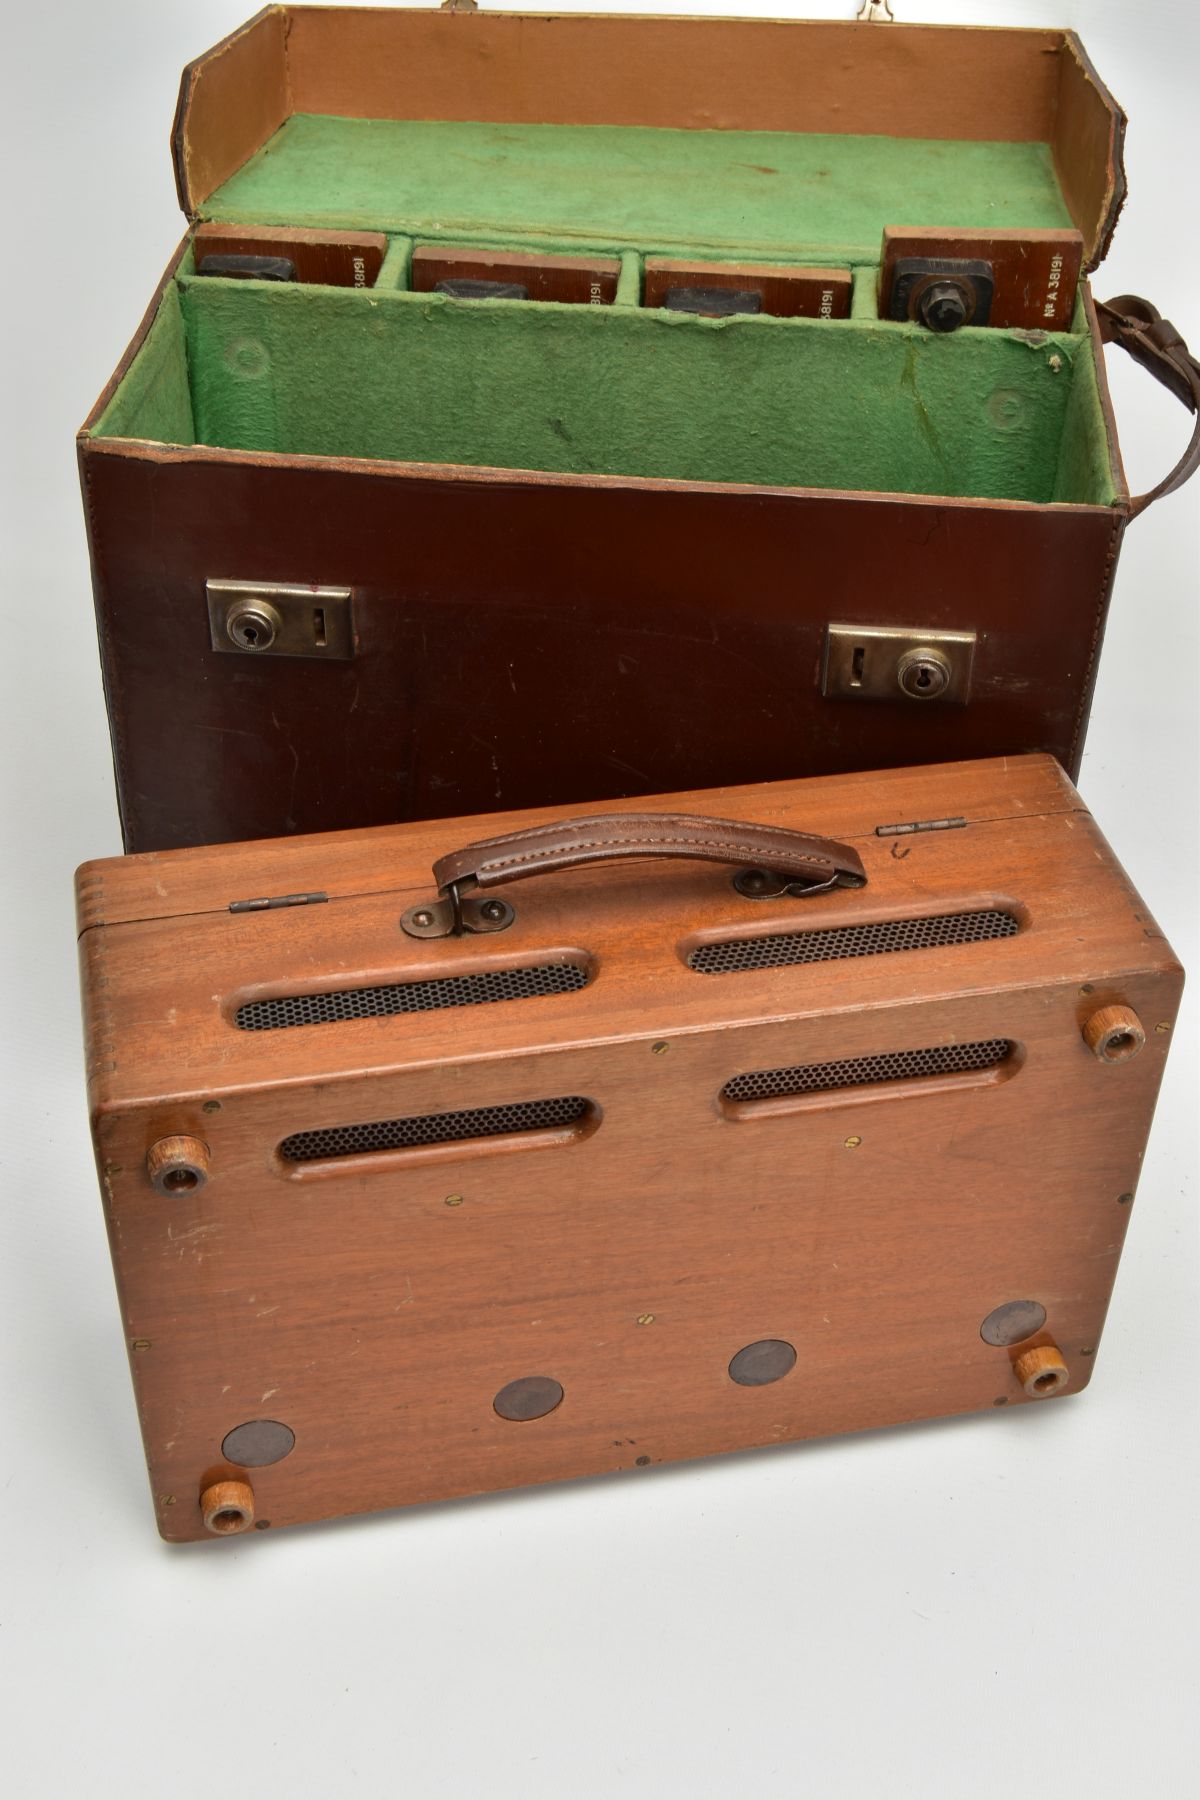 A BOXED ORIGINAL AIR MINISTRY (RAF) Ampheres and volts meter in leather carrying case, together with - Image 6 of 7